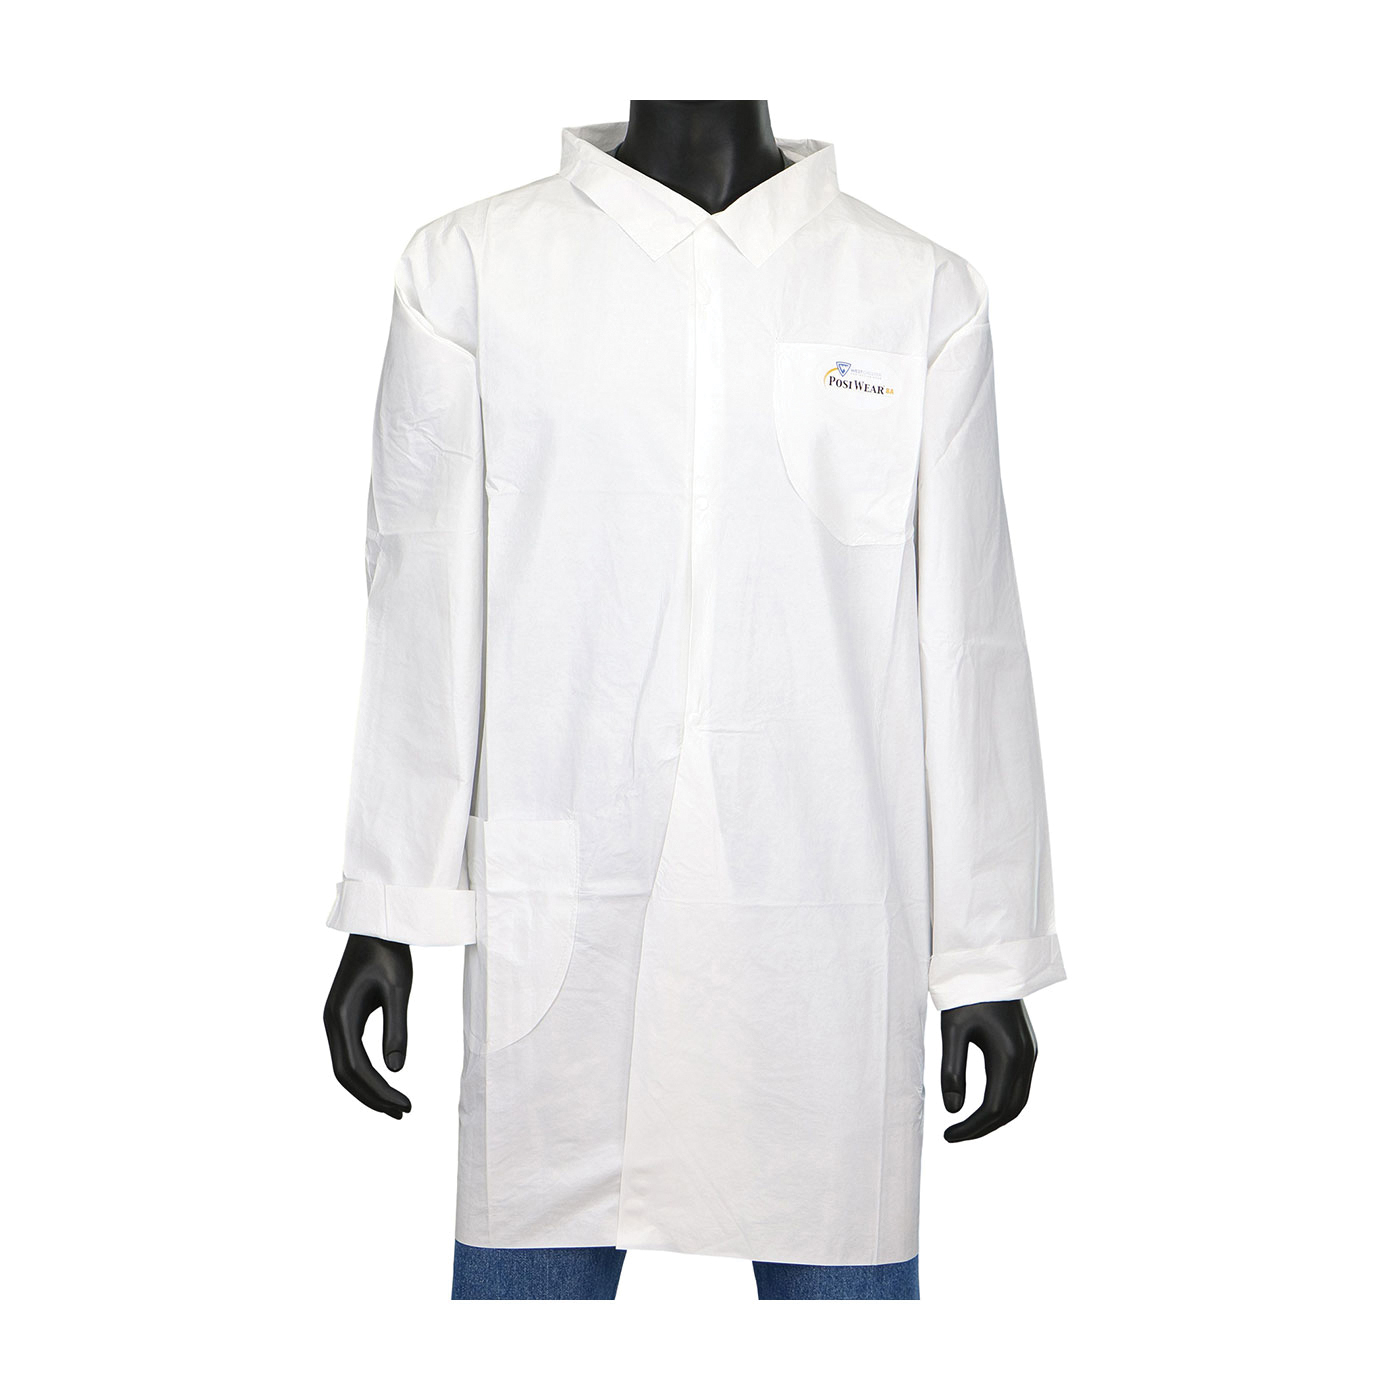 PIP® 3620/M 3620 BA Lab Coat, M, White, Polypropylene/Polyethylene, 37 in L, Front Snap Closure, 2 Pockets, ANSI Specified, ASTM 1670, NFPA 99